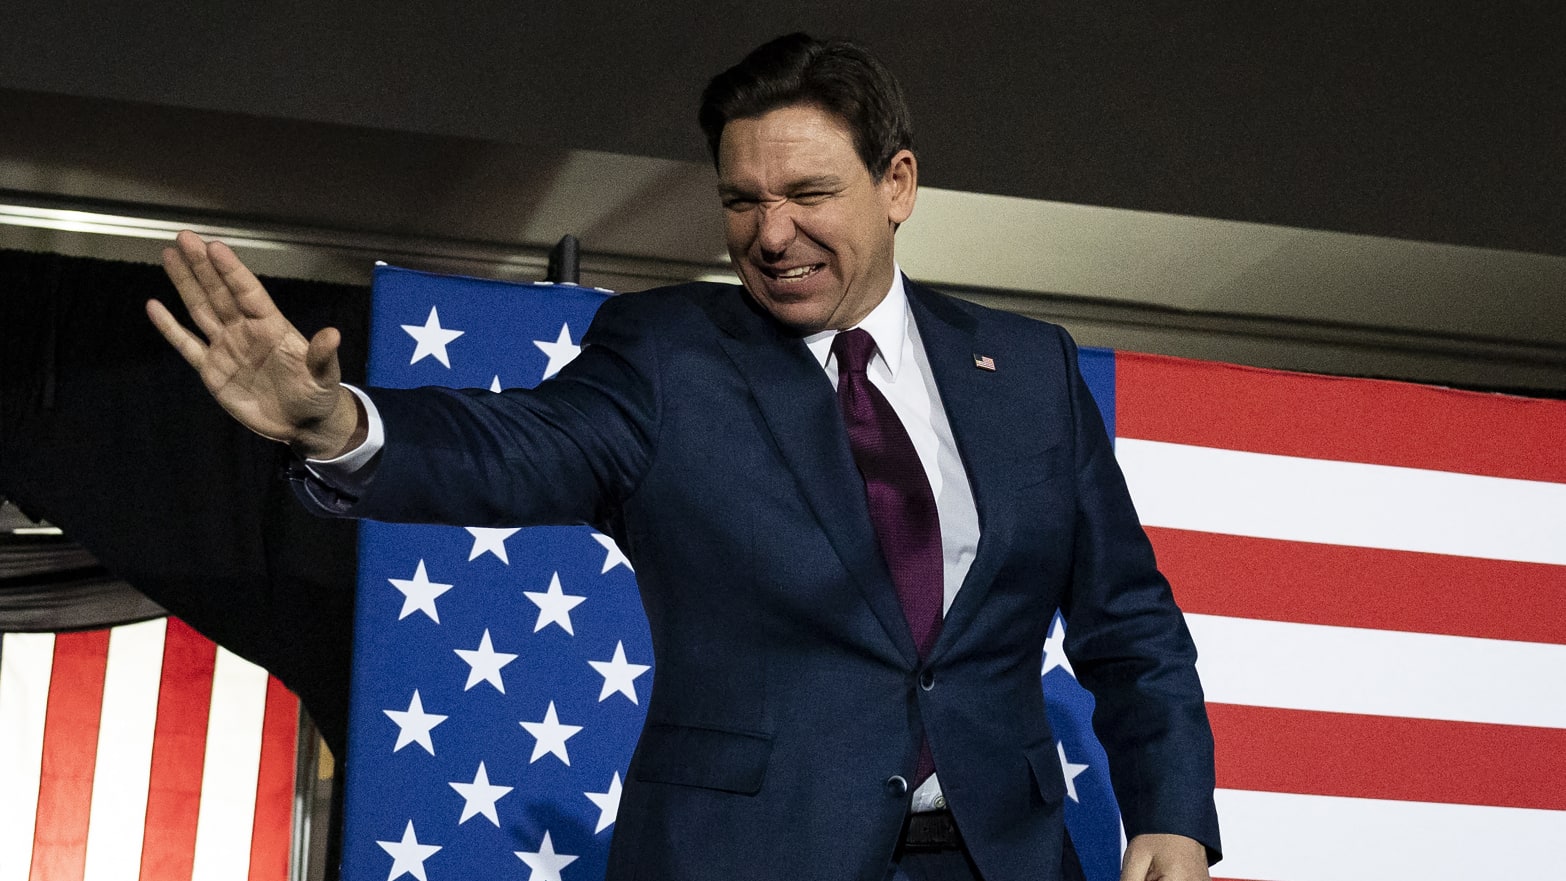 Florida Governor and Republican presidential hopeful Ron DeSantis arrives at a watch party during the 2024 Iowa Republican presidential caucuses in West Des Moines, Iowa, on January 15, 2024.